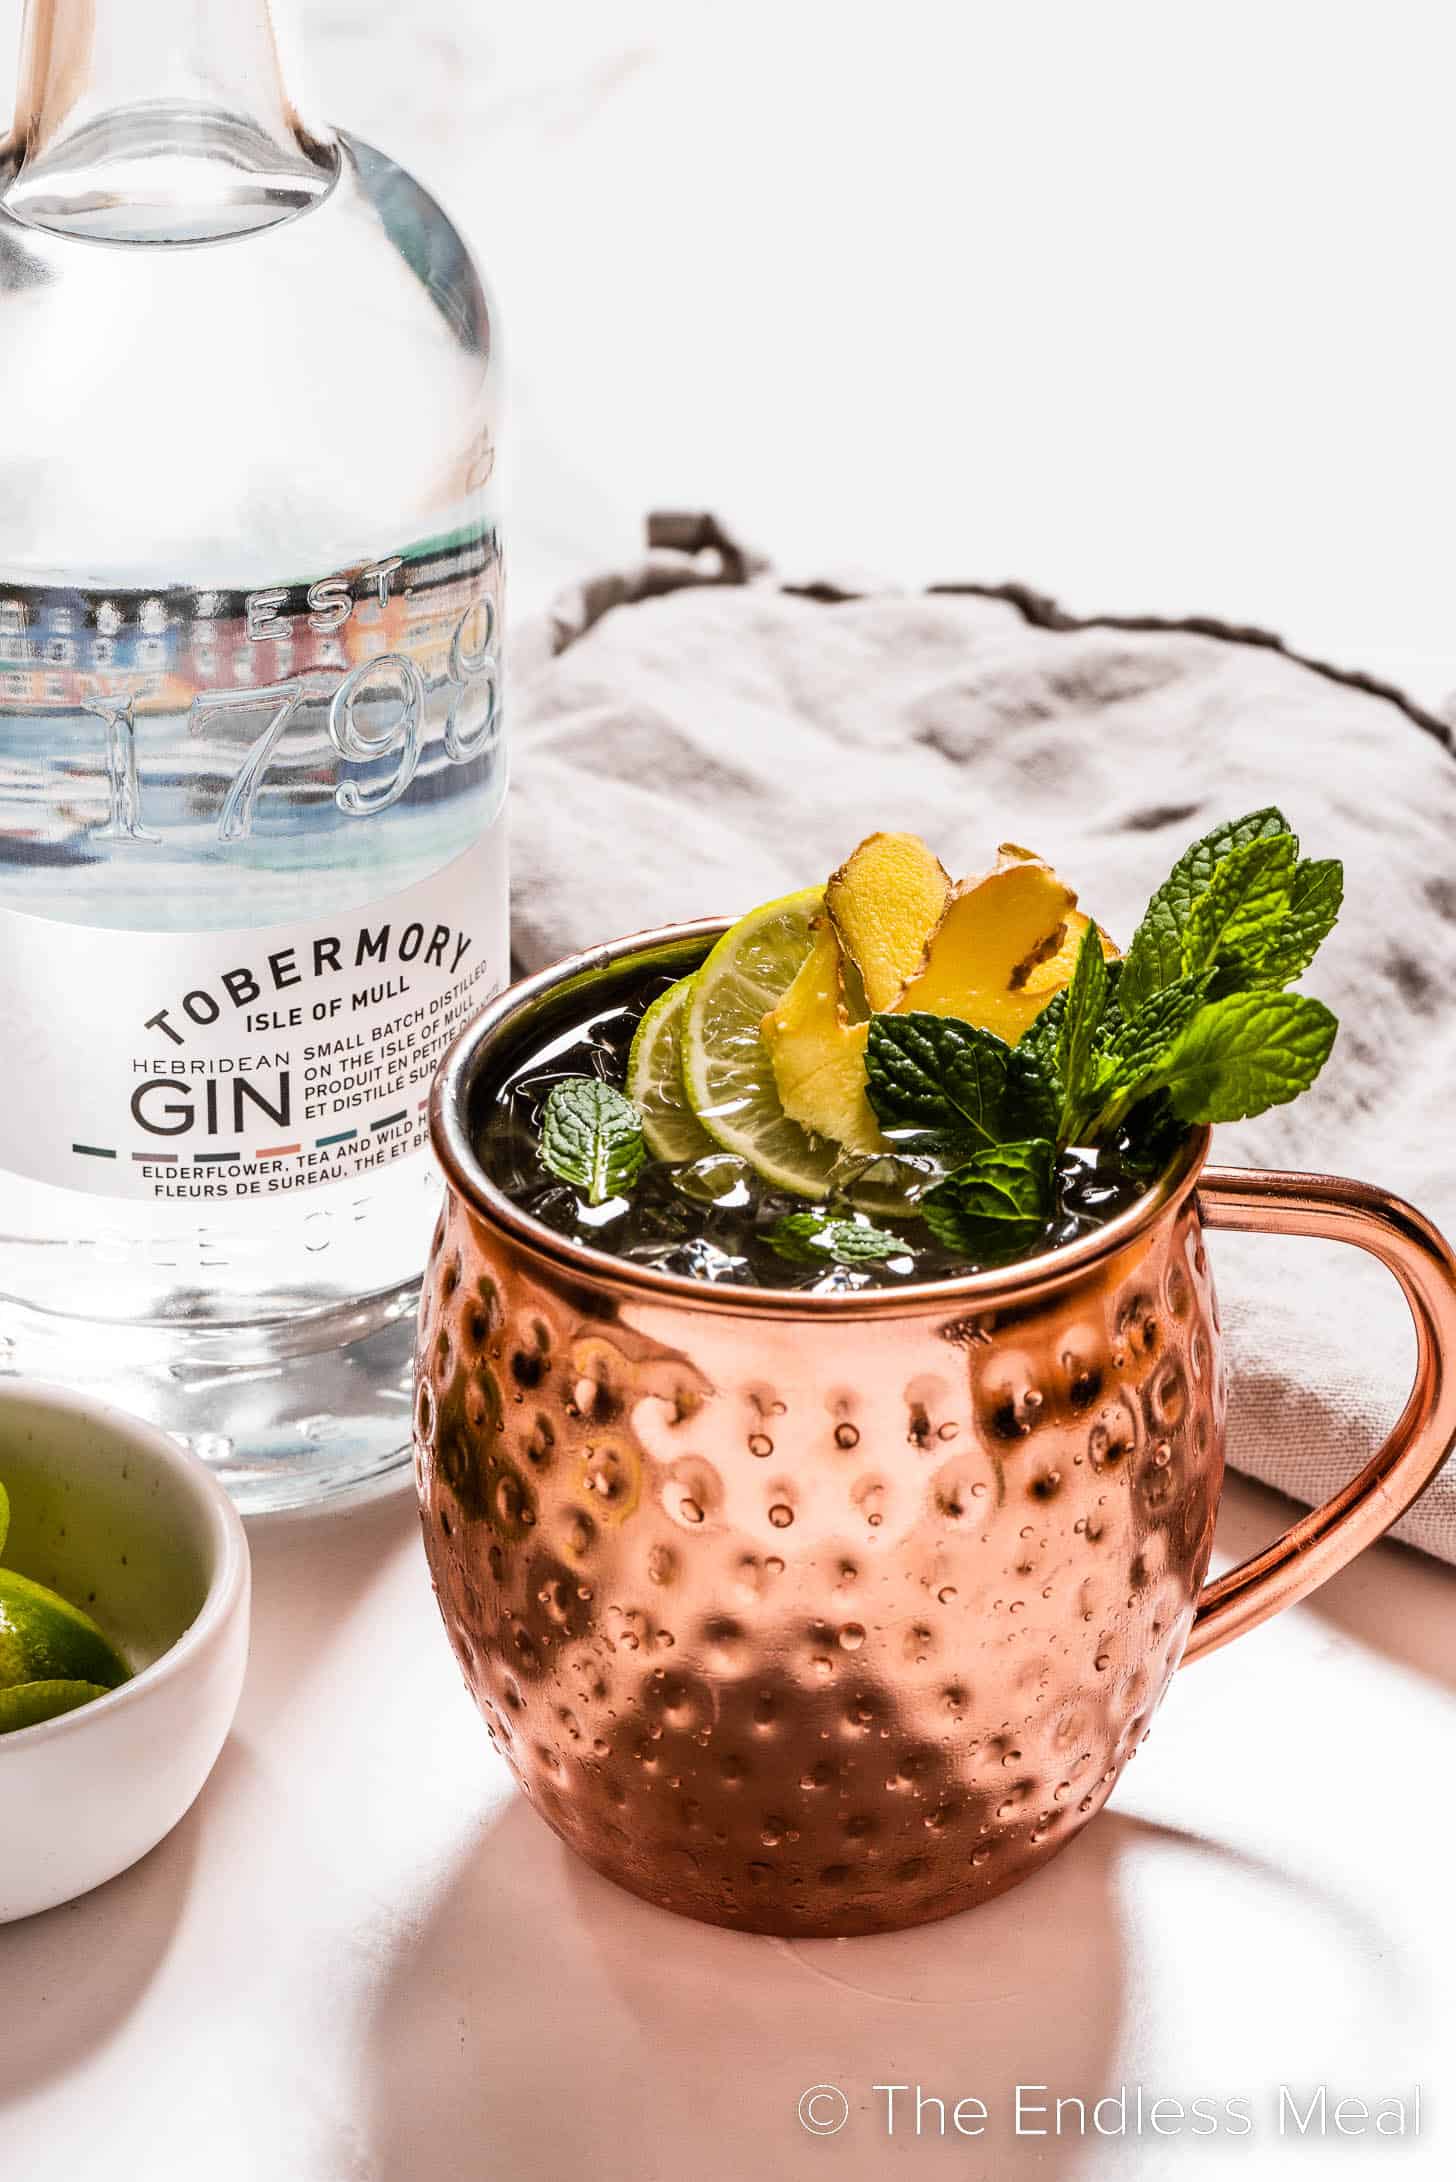 A Gin Mule next to a bottle of gin